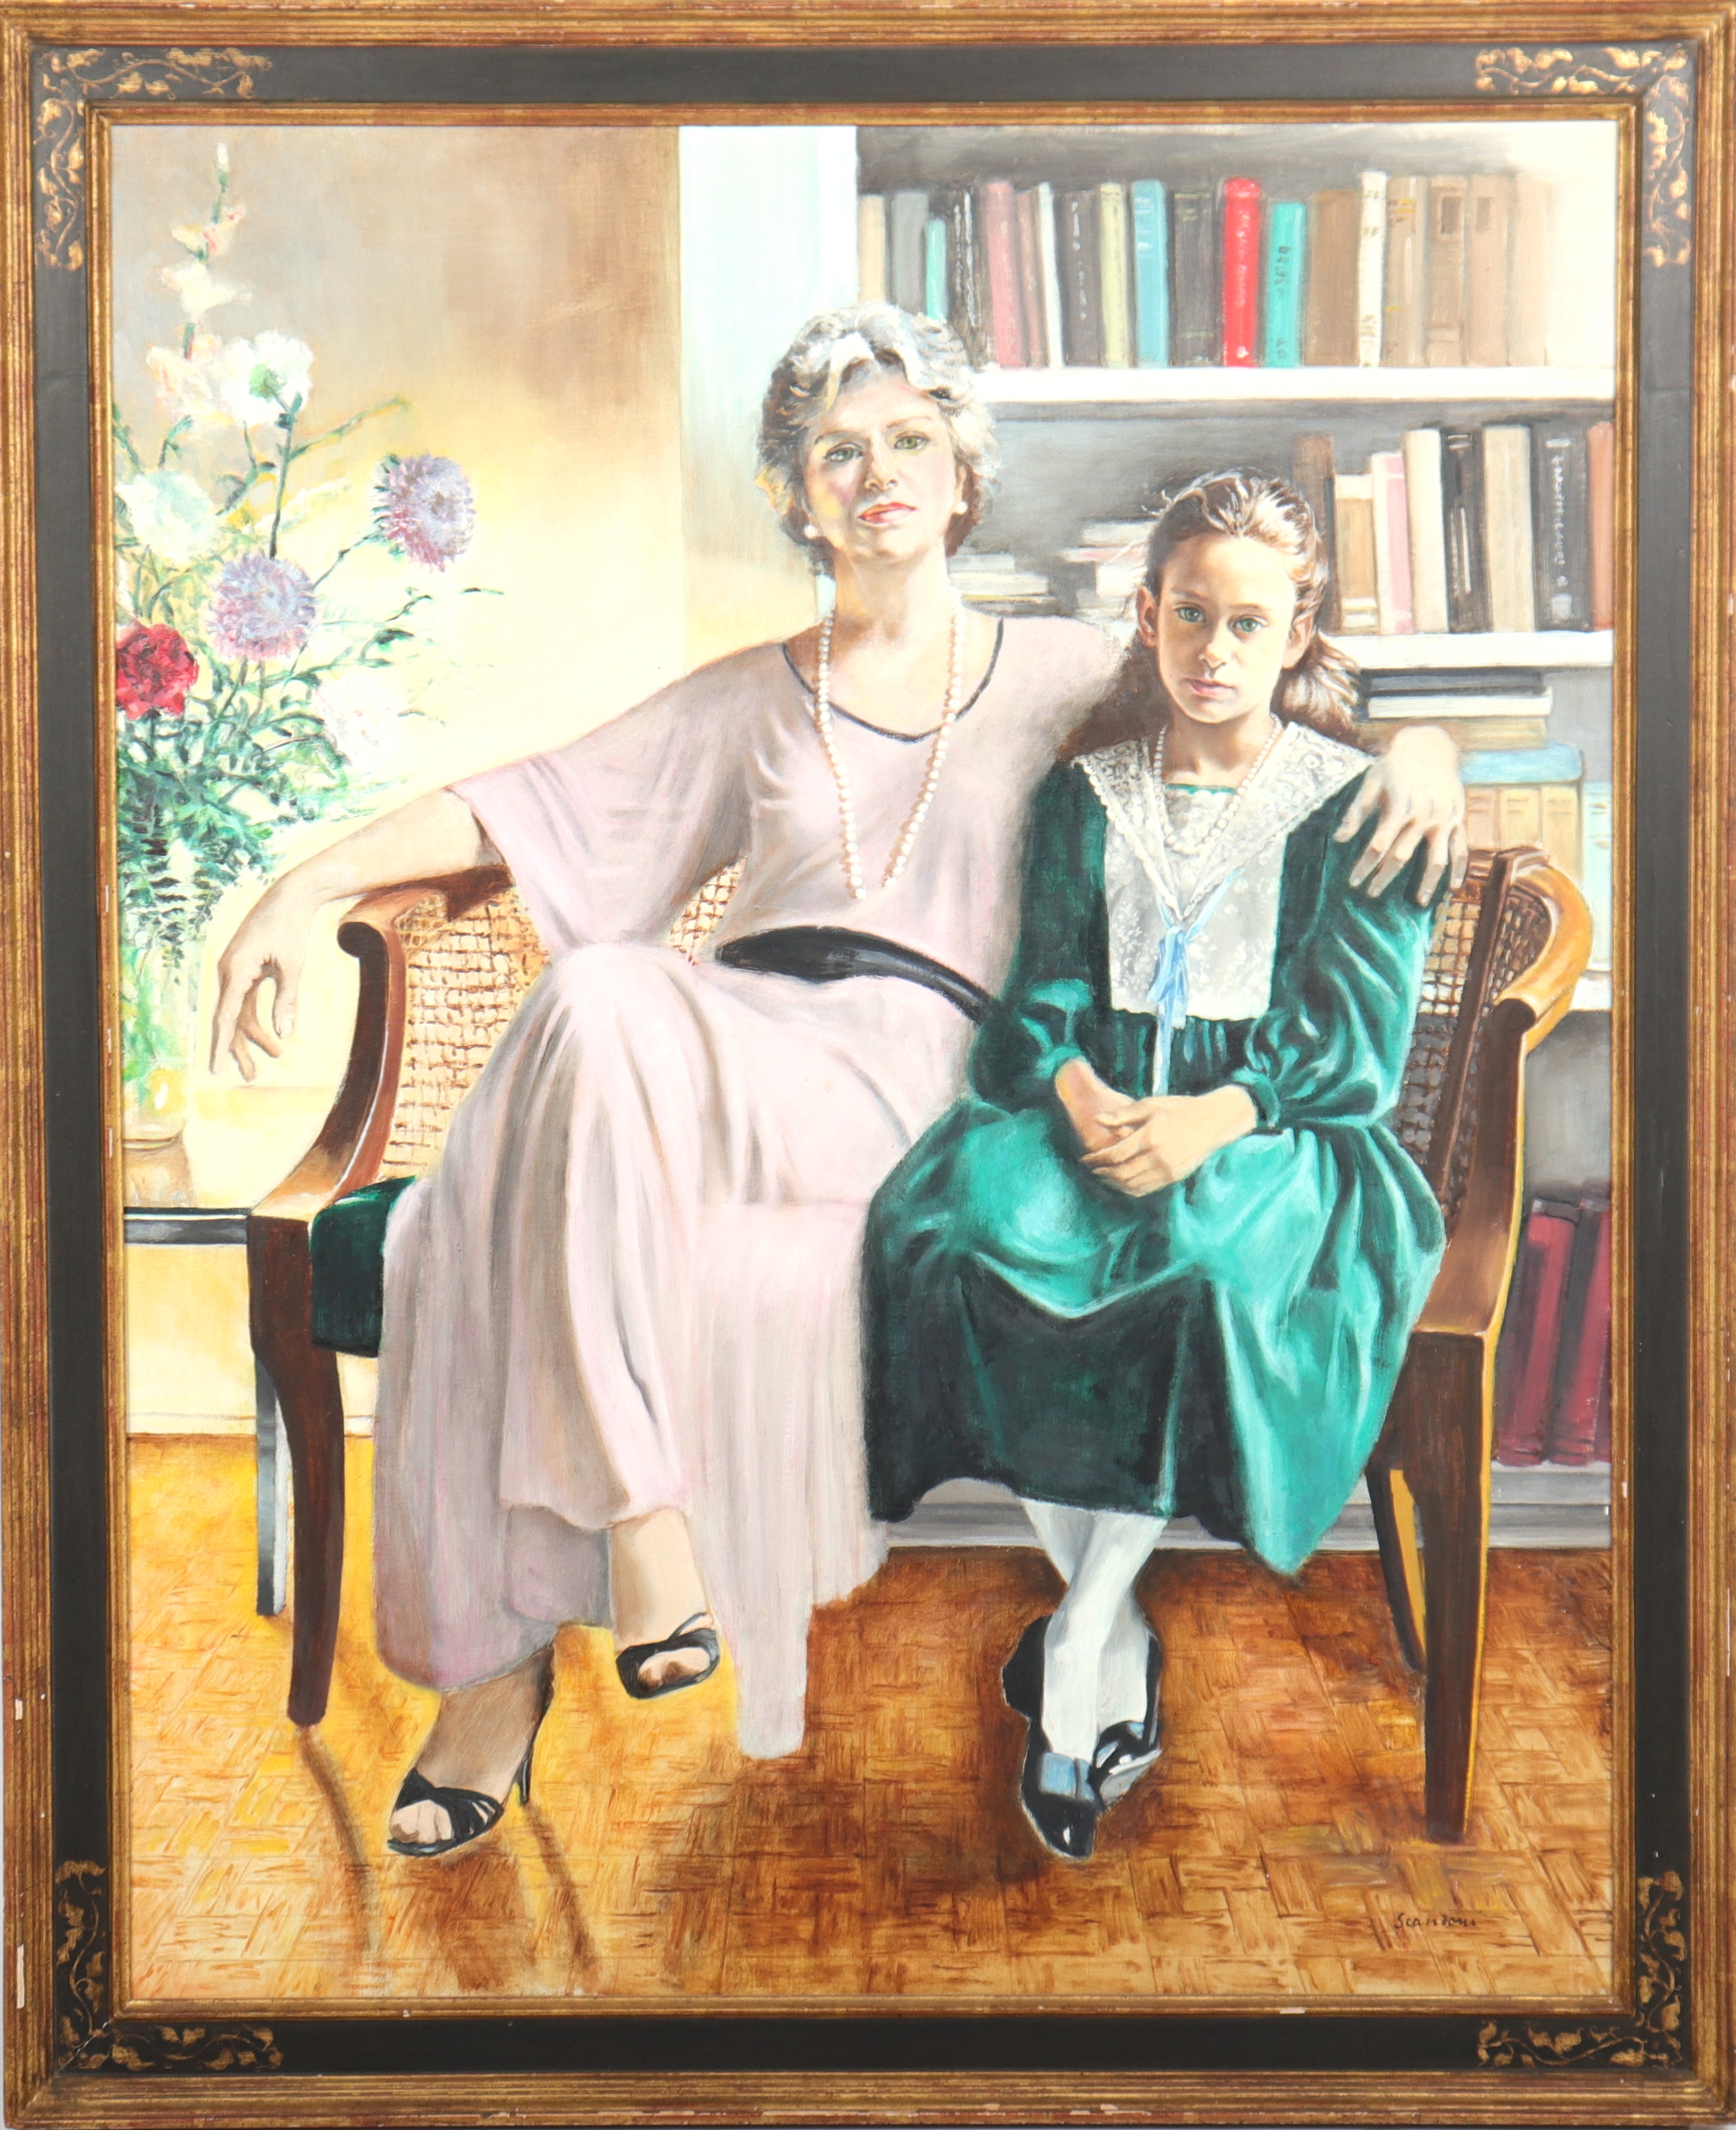 SIGNED SCANZONI "MOTHER & DAUGHTER"